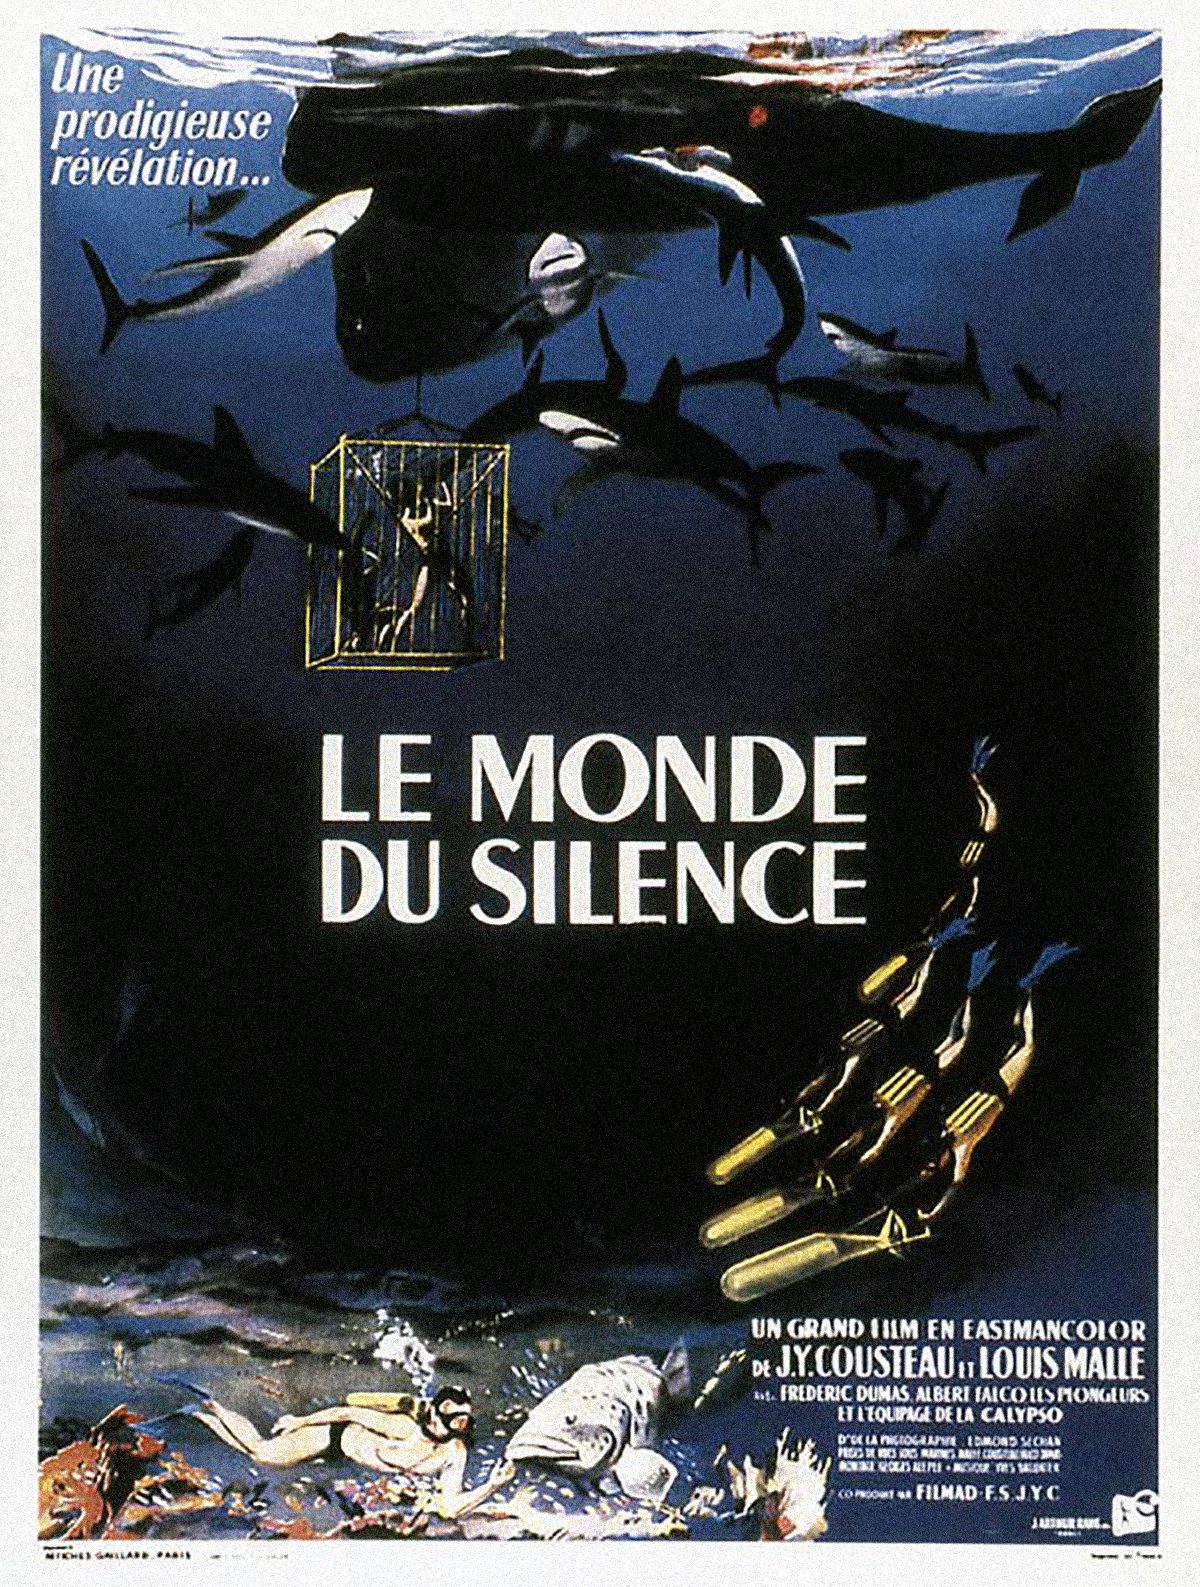 The Silent World, by Jacques Cousteau movie poster.